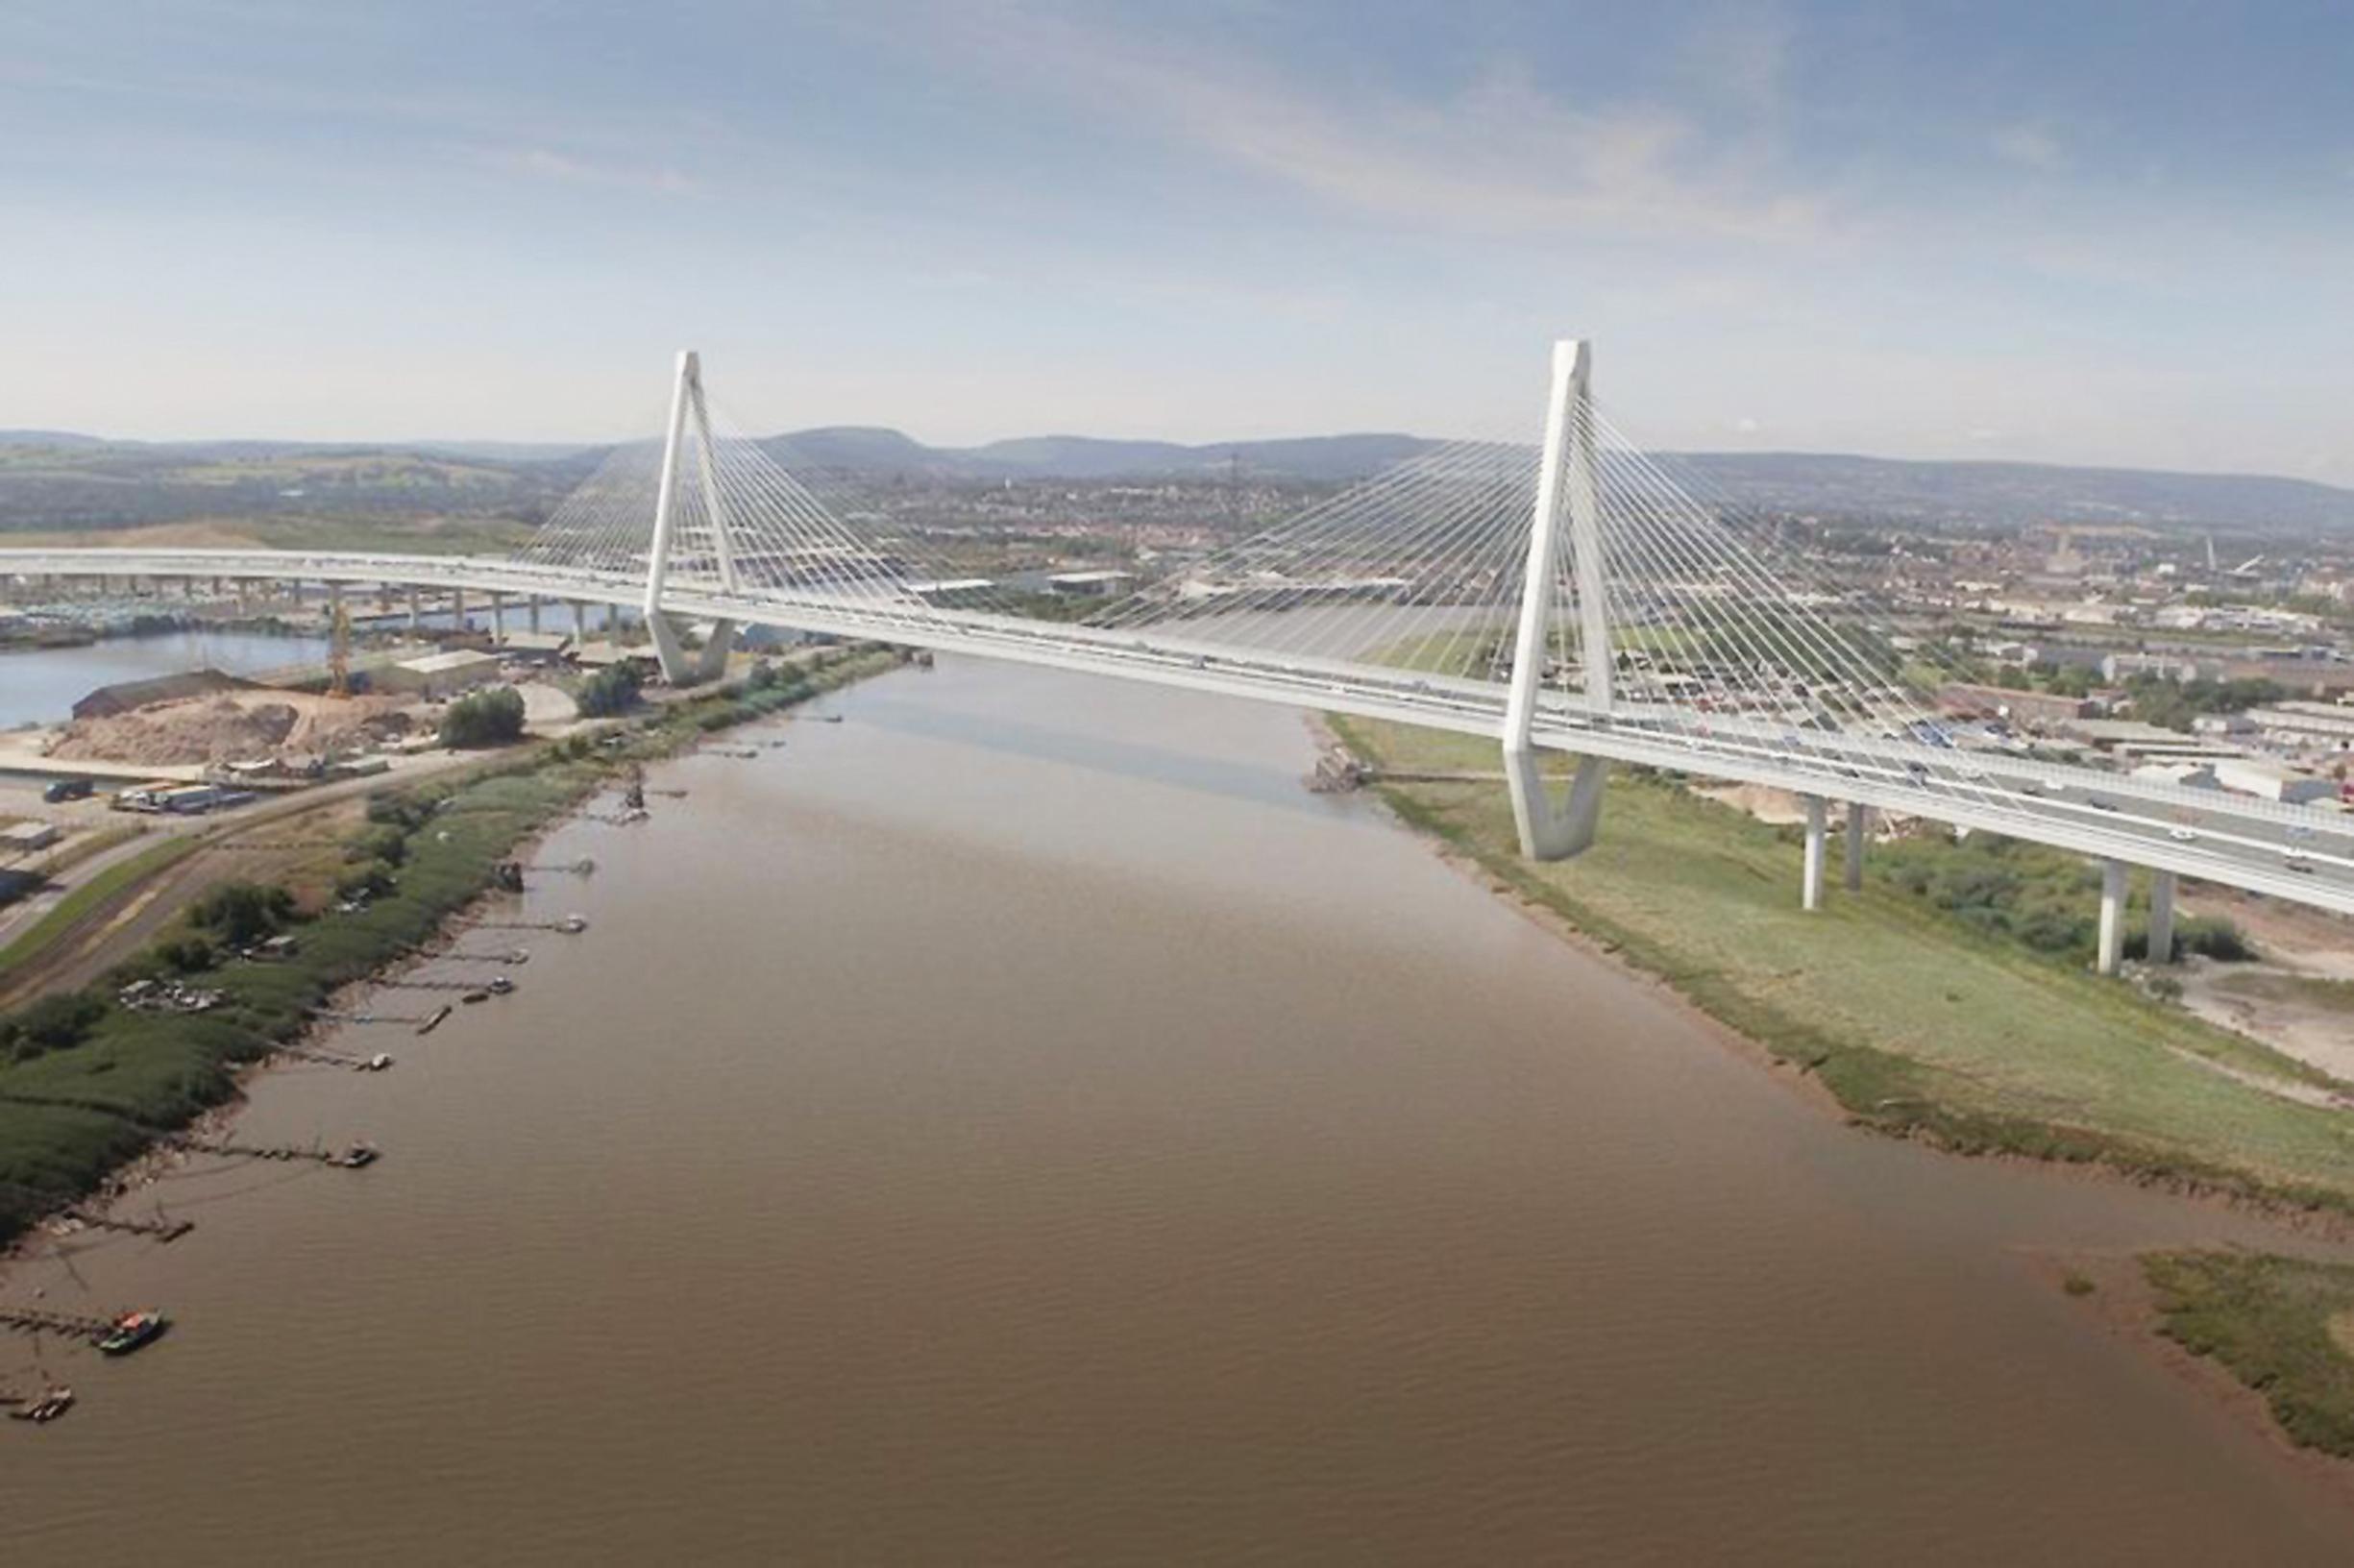 How the viaduct over the 
River Usk and docks could look